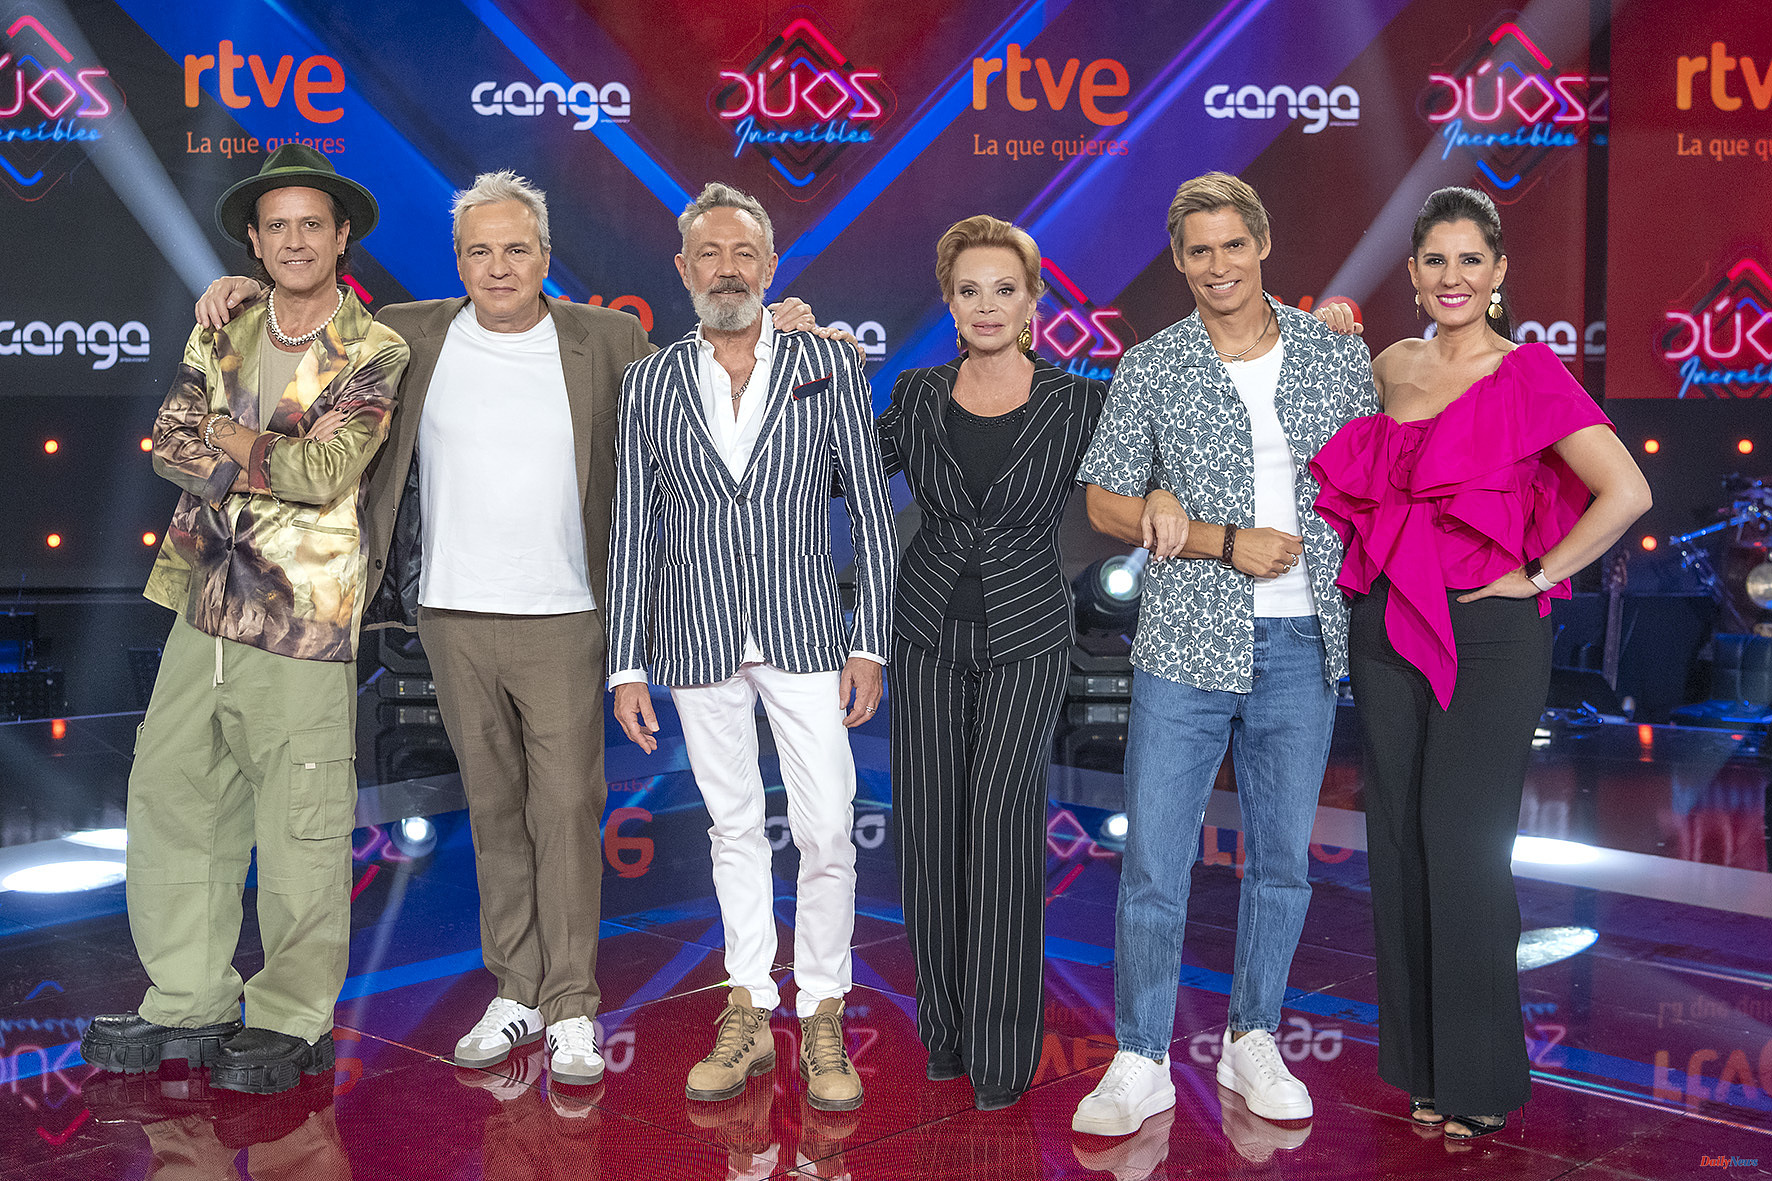 RTVE Dúos Increíbles returns to La 1 with "more competitiveness, more emotion and more level"